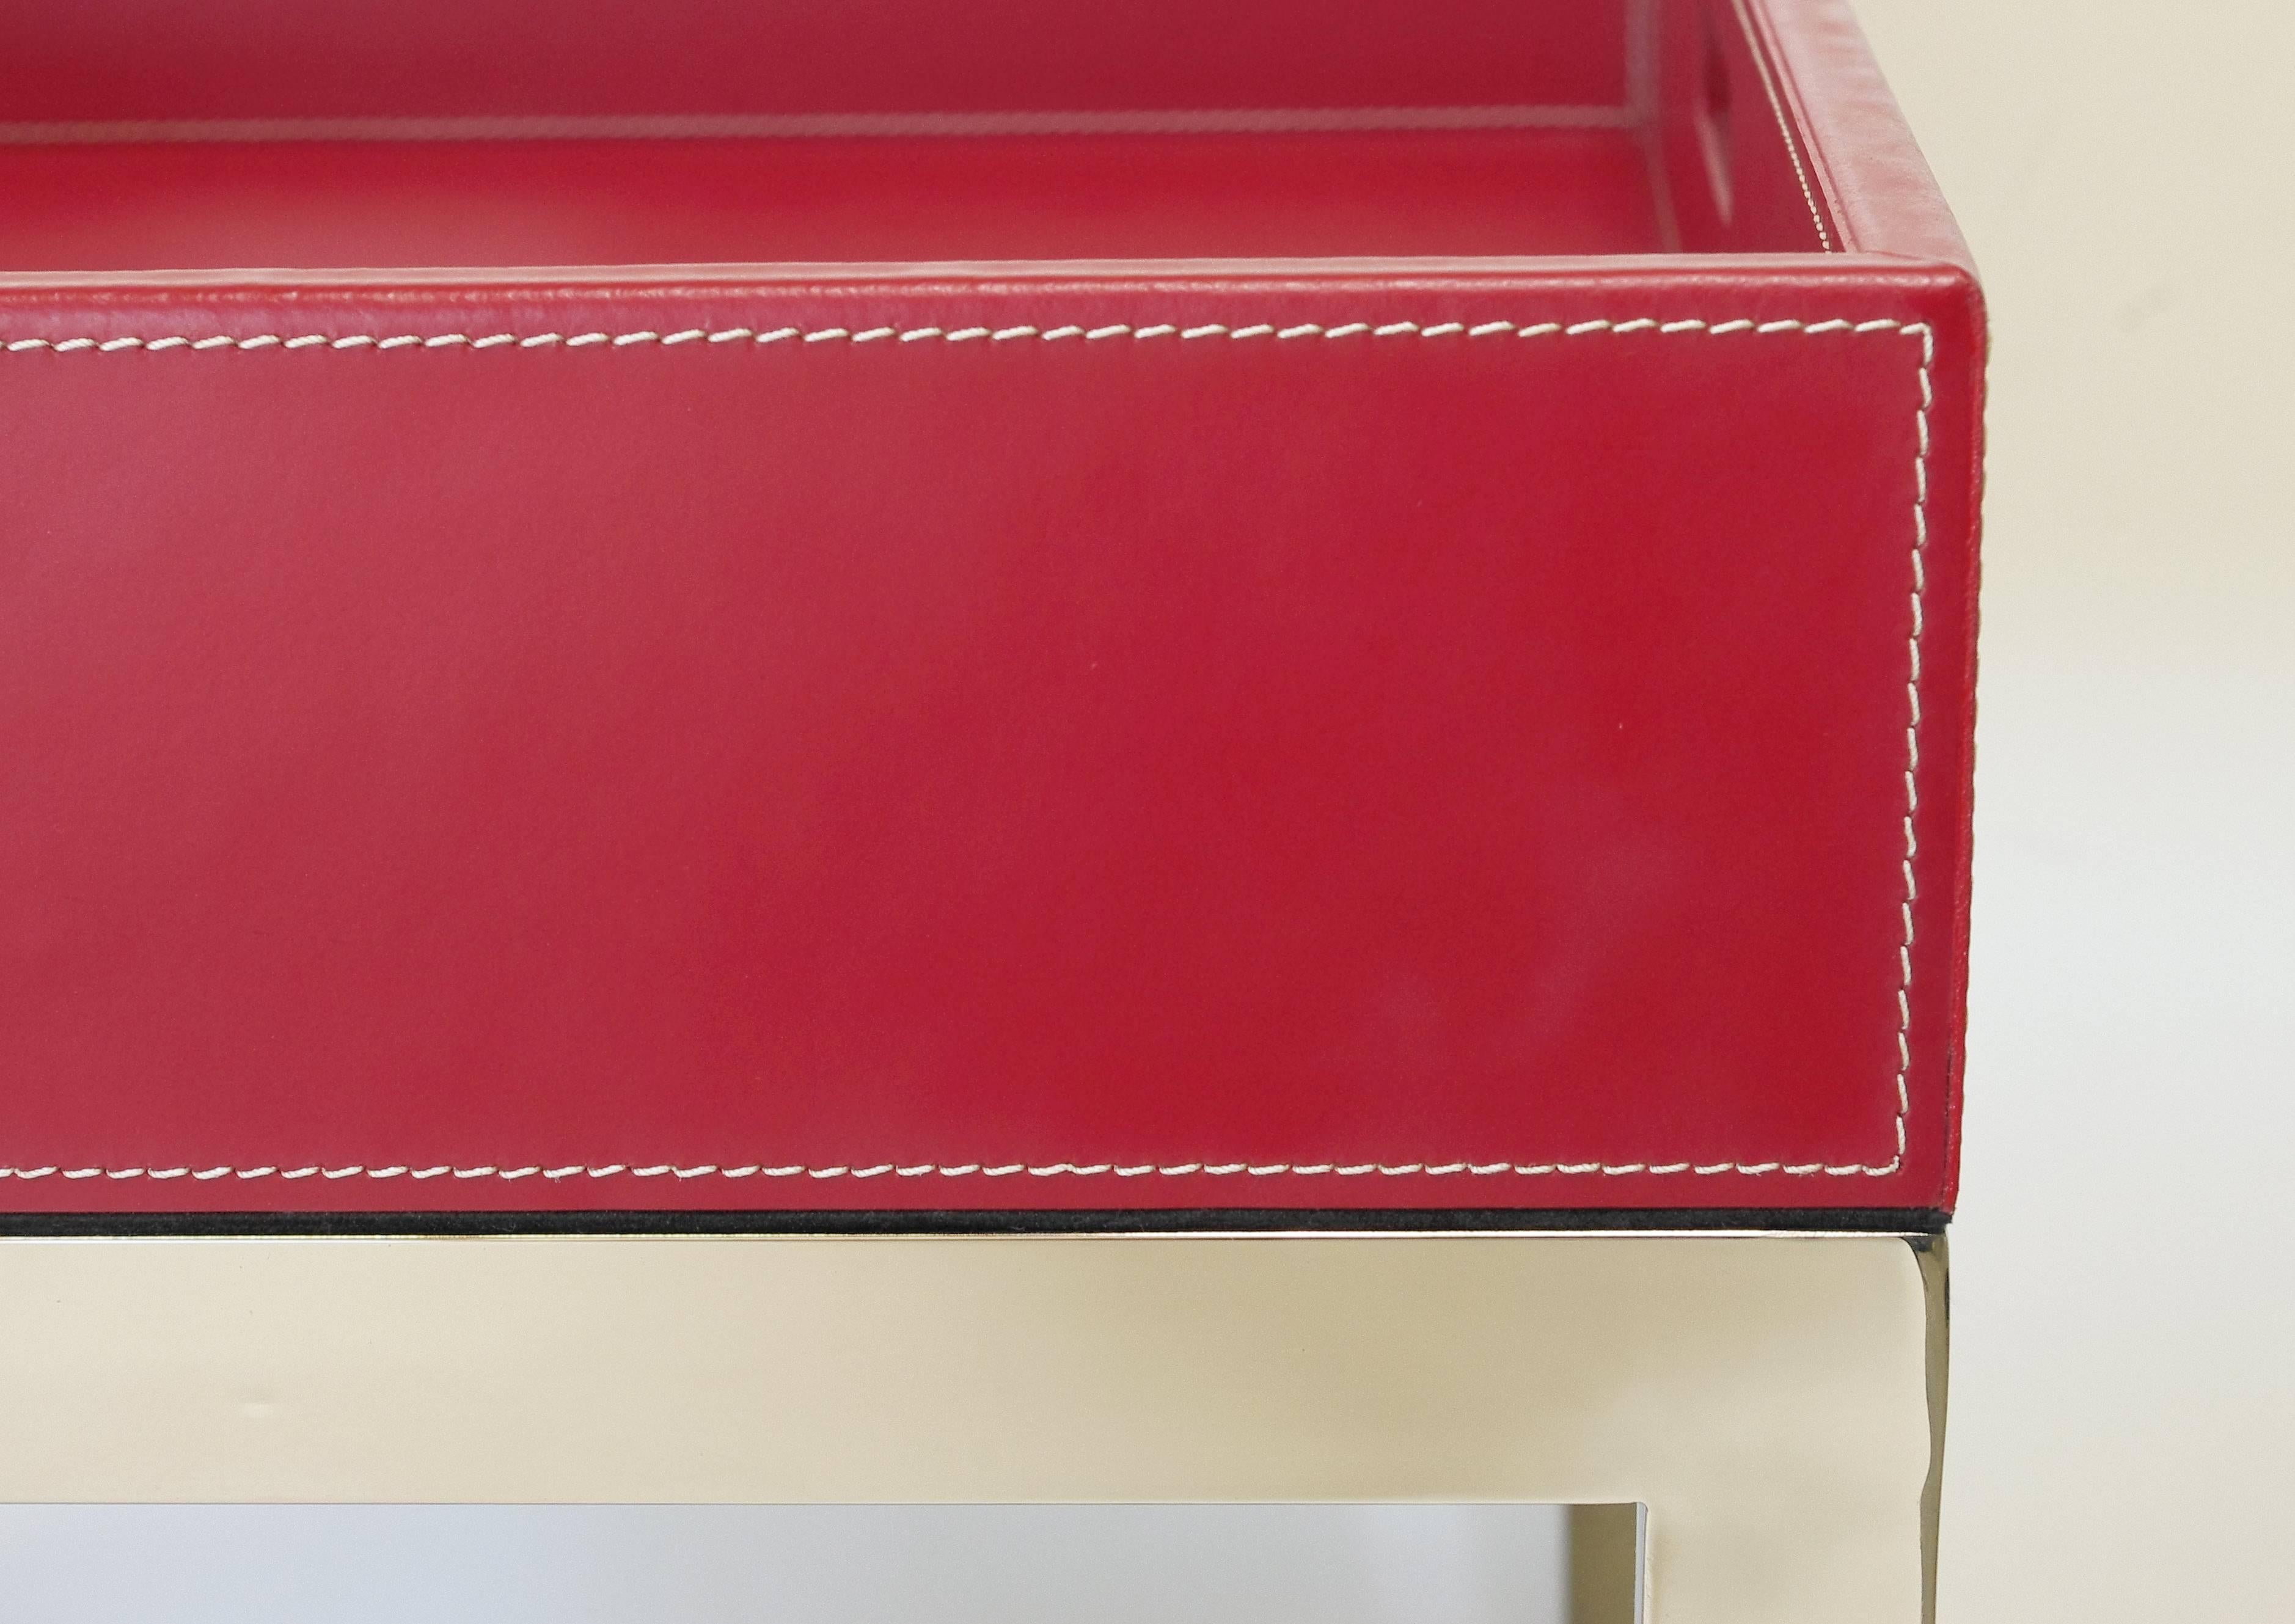 Modern Red Leather and Stainless Steel Tray Table by Fabio Ltd FINAL CLEARANCE SALE